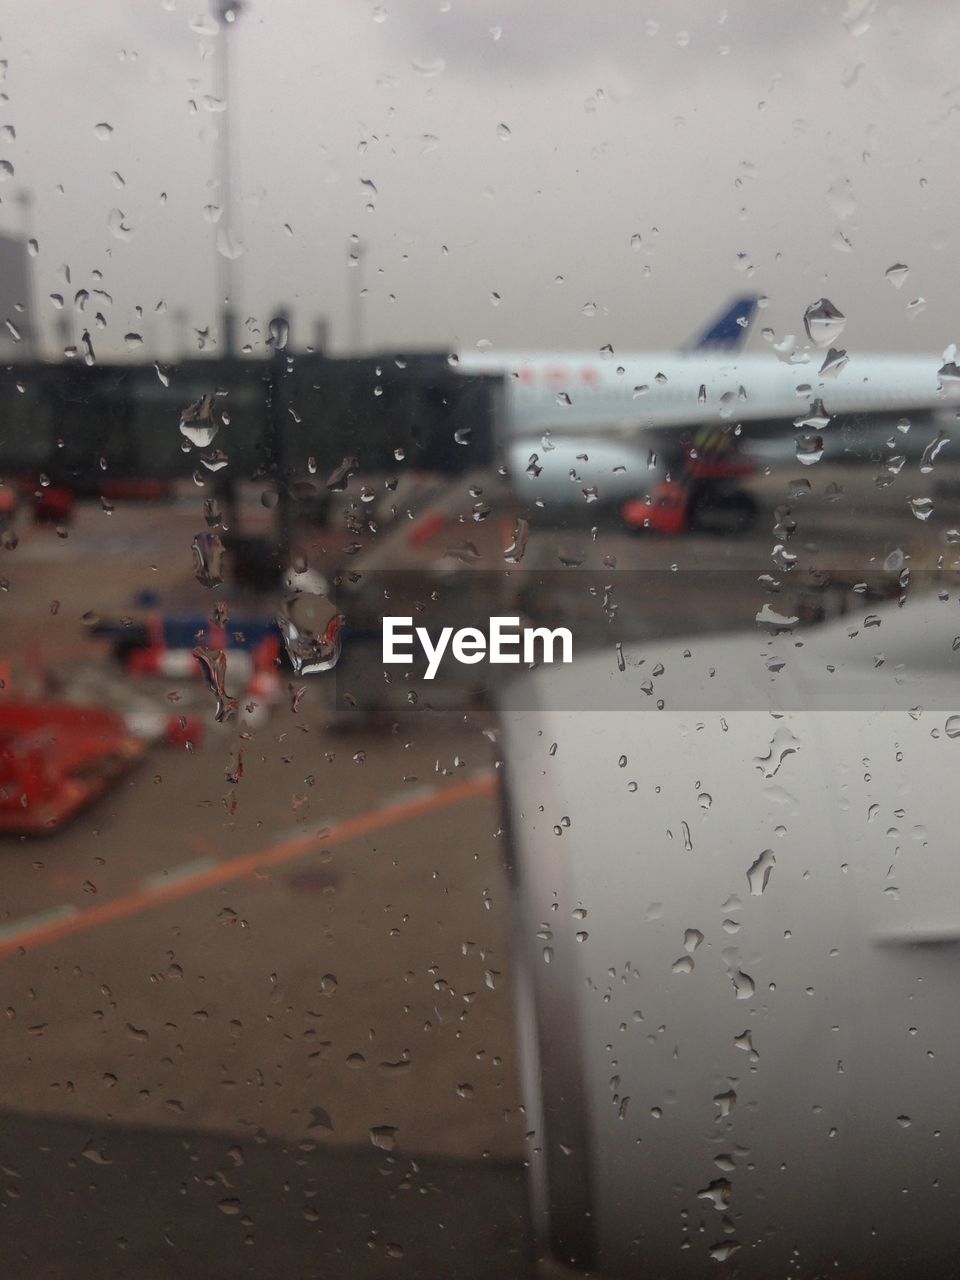 Waterdrops on glass with view of airport terminal